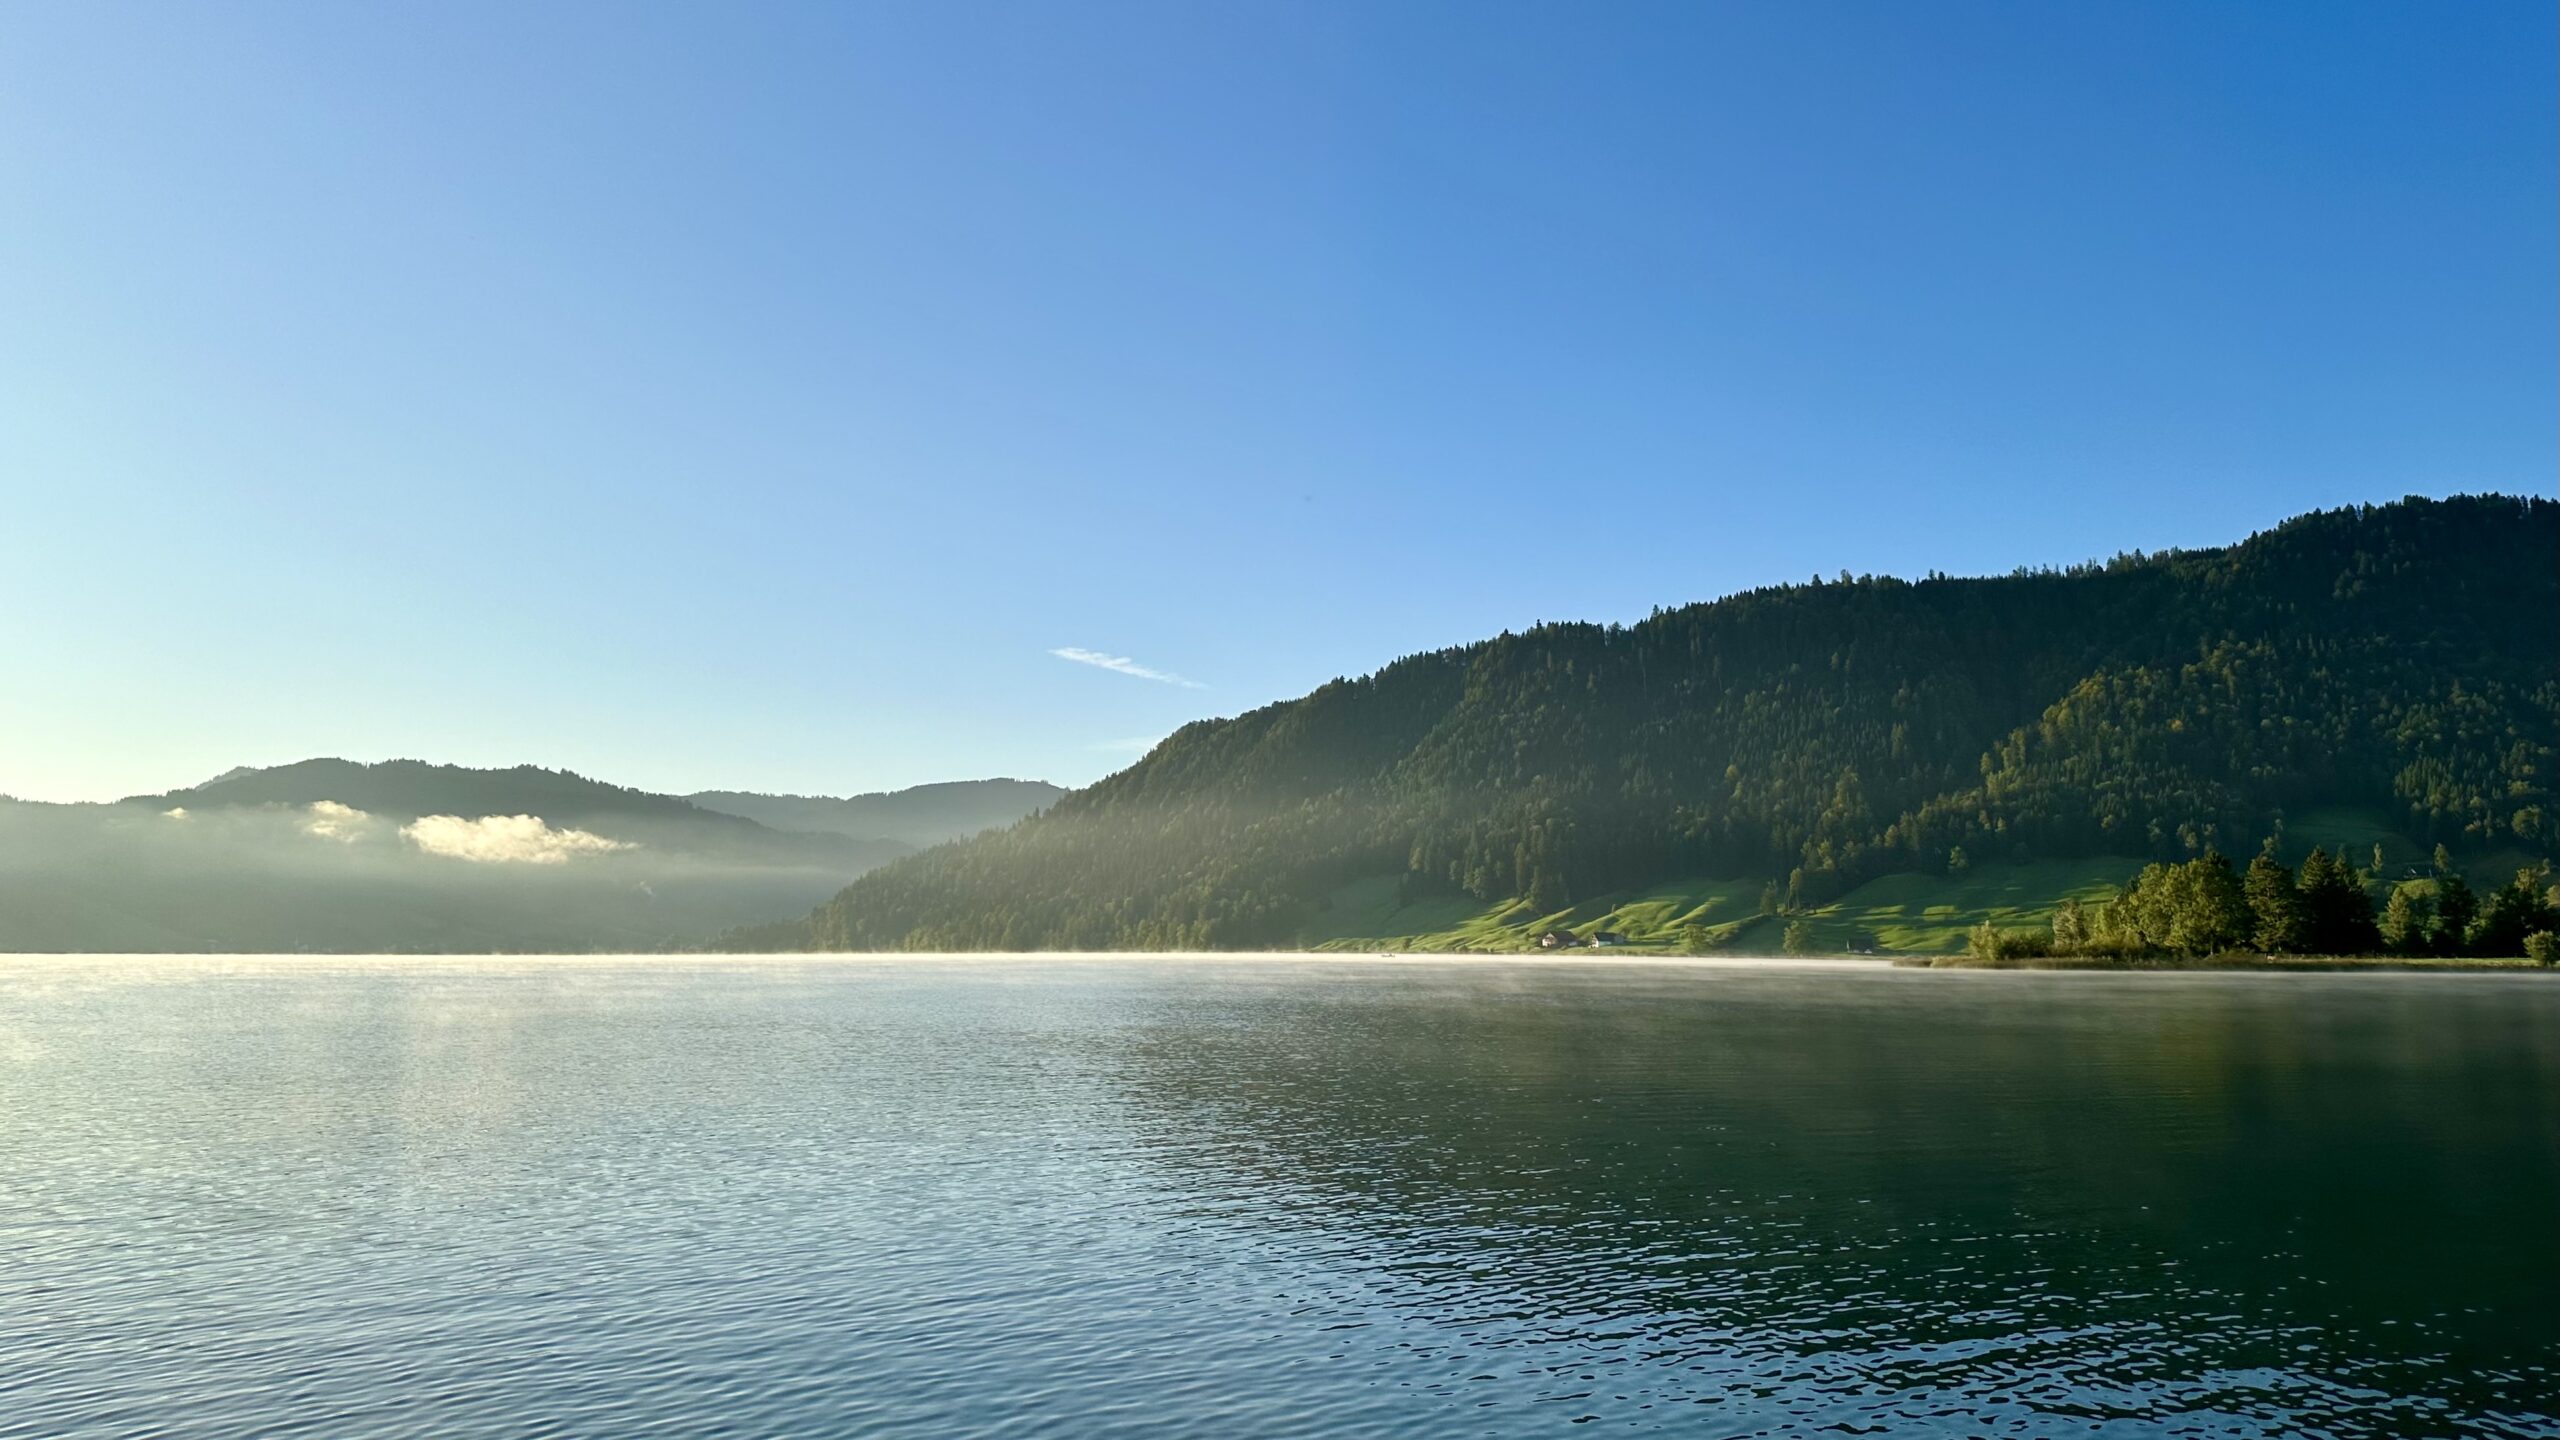 Green forested hills over a blue lake with a sheen of white mist under a blue sky.